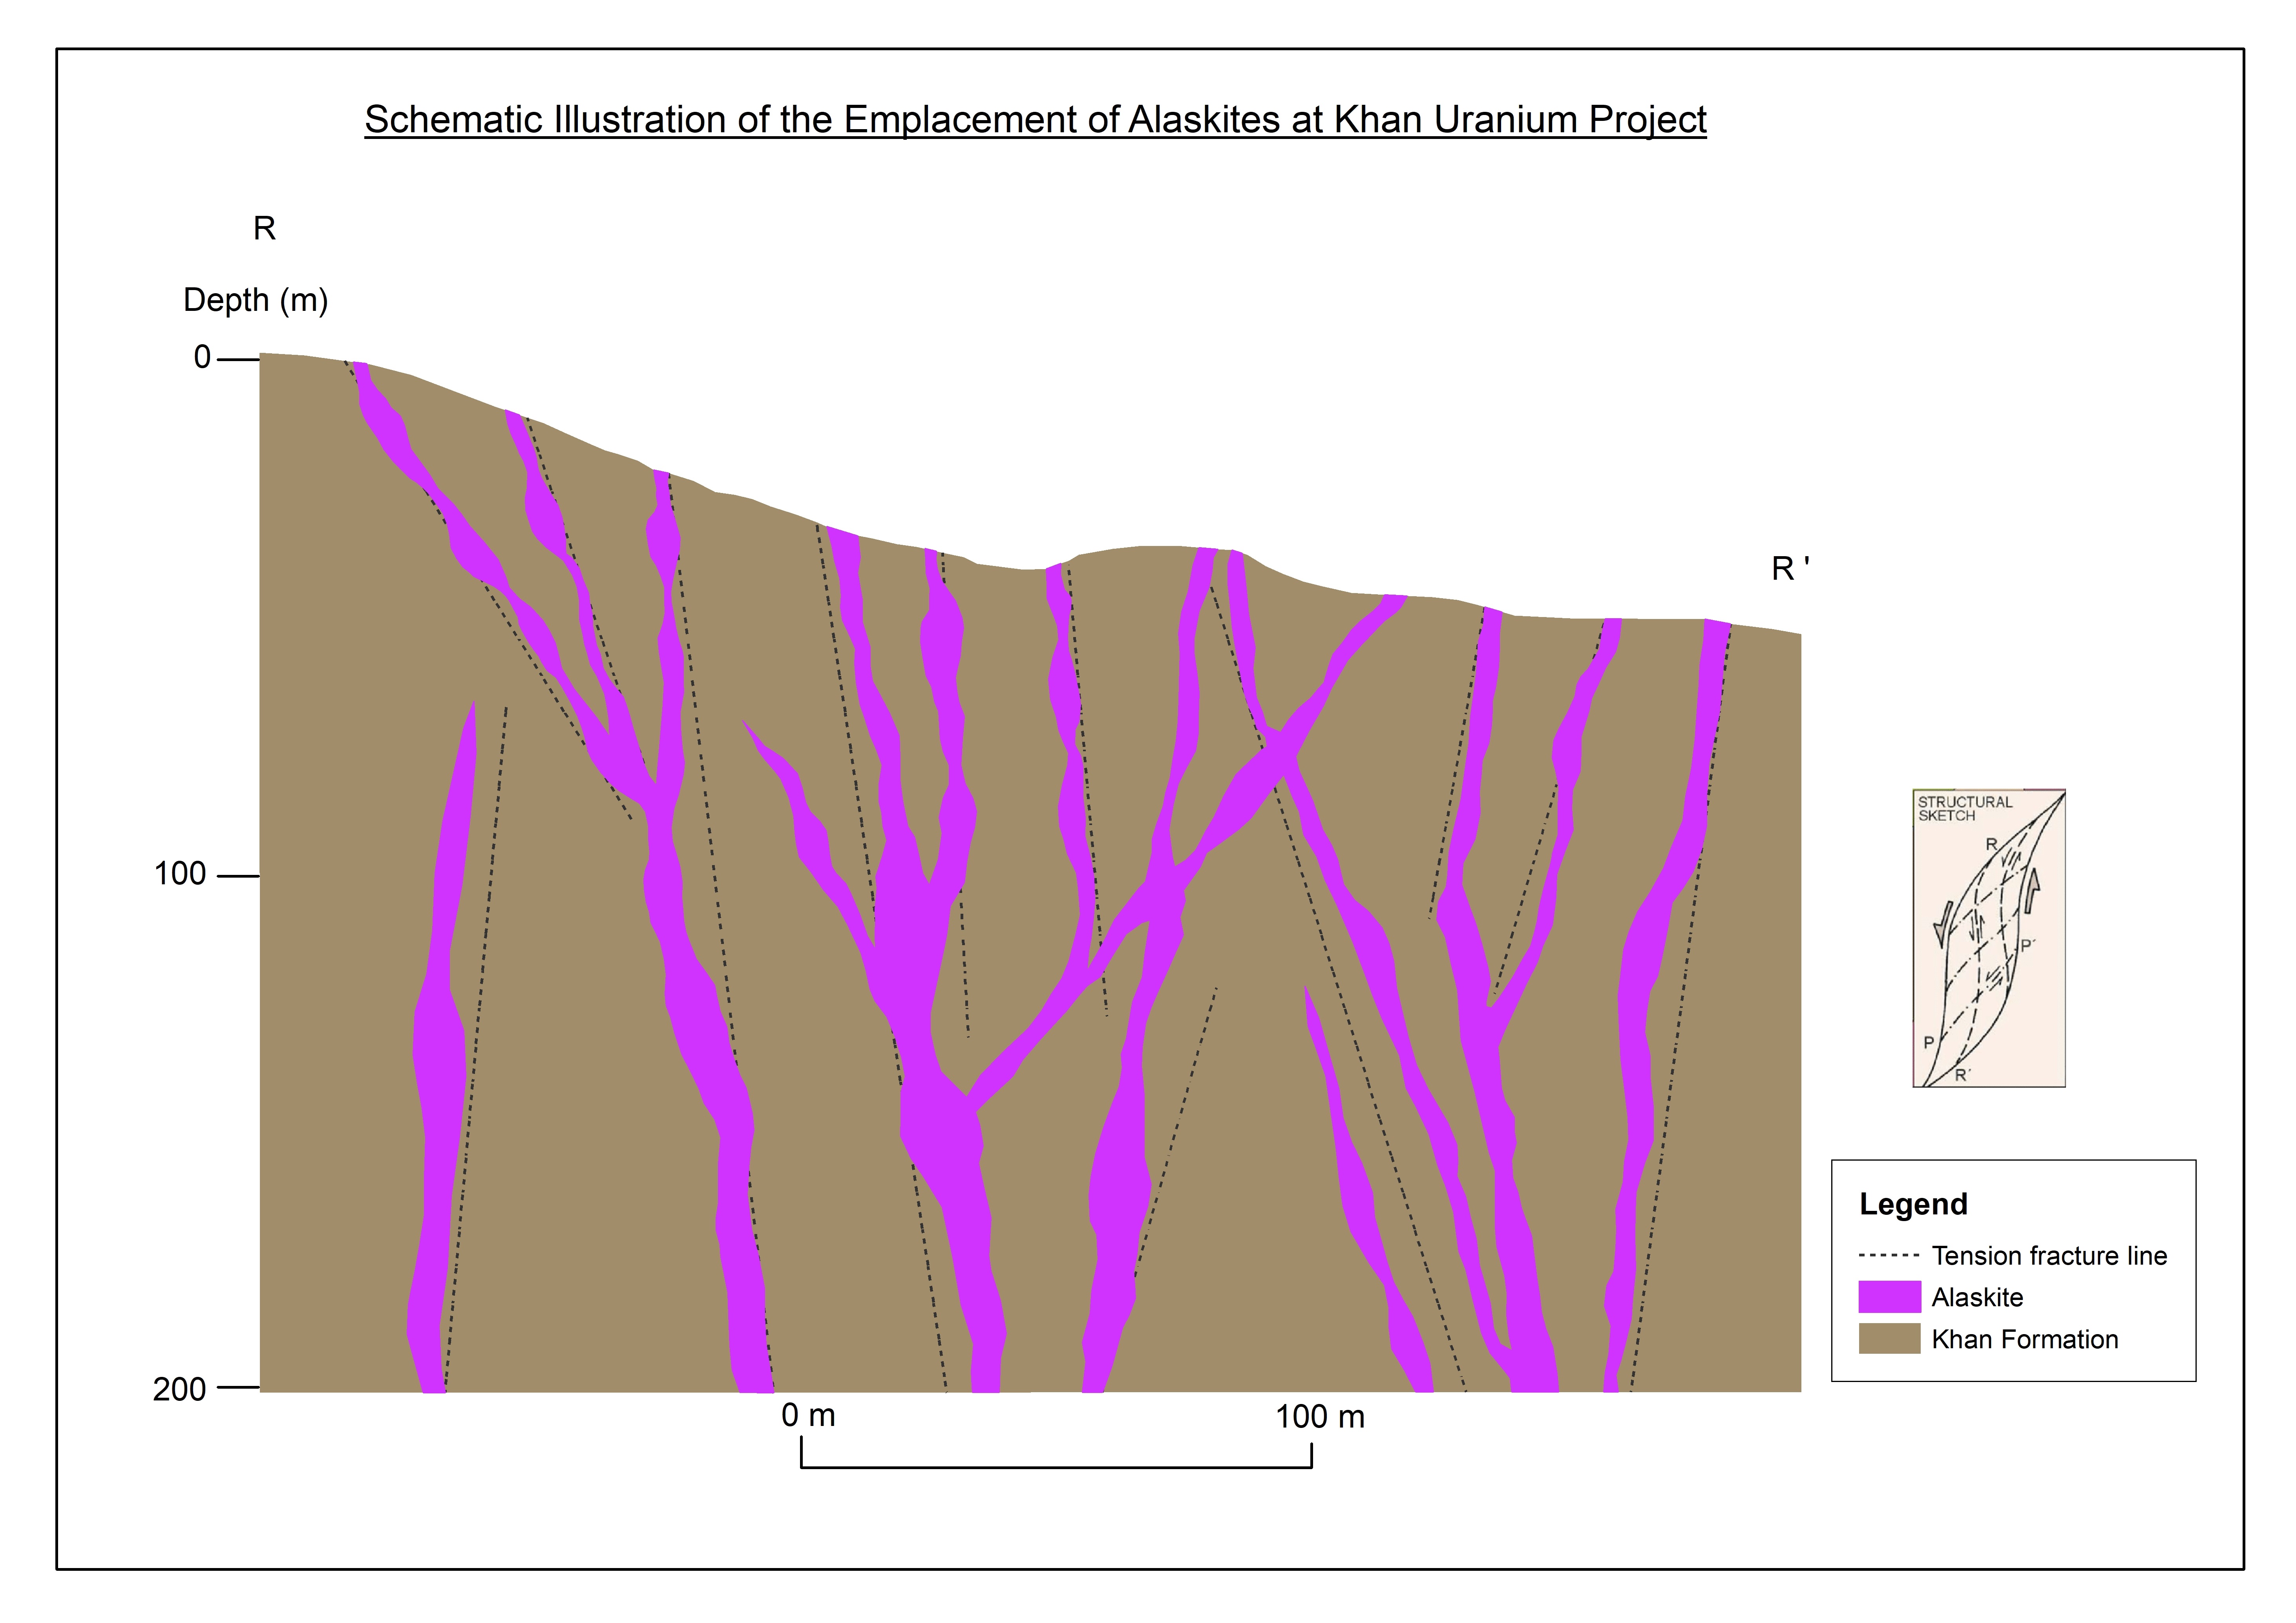 Schematic cross-section of the mapped mineralized alaskites at Anomaly 5.